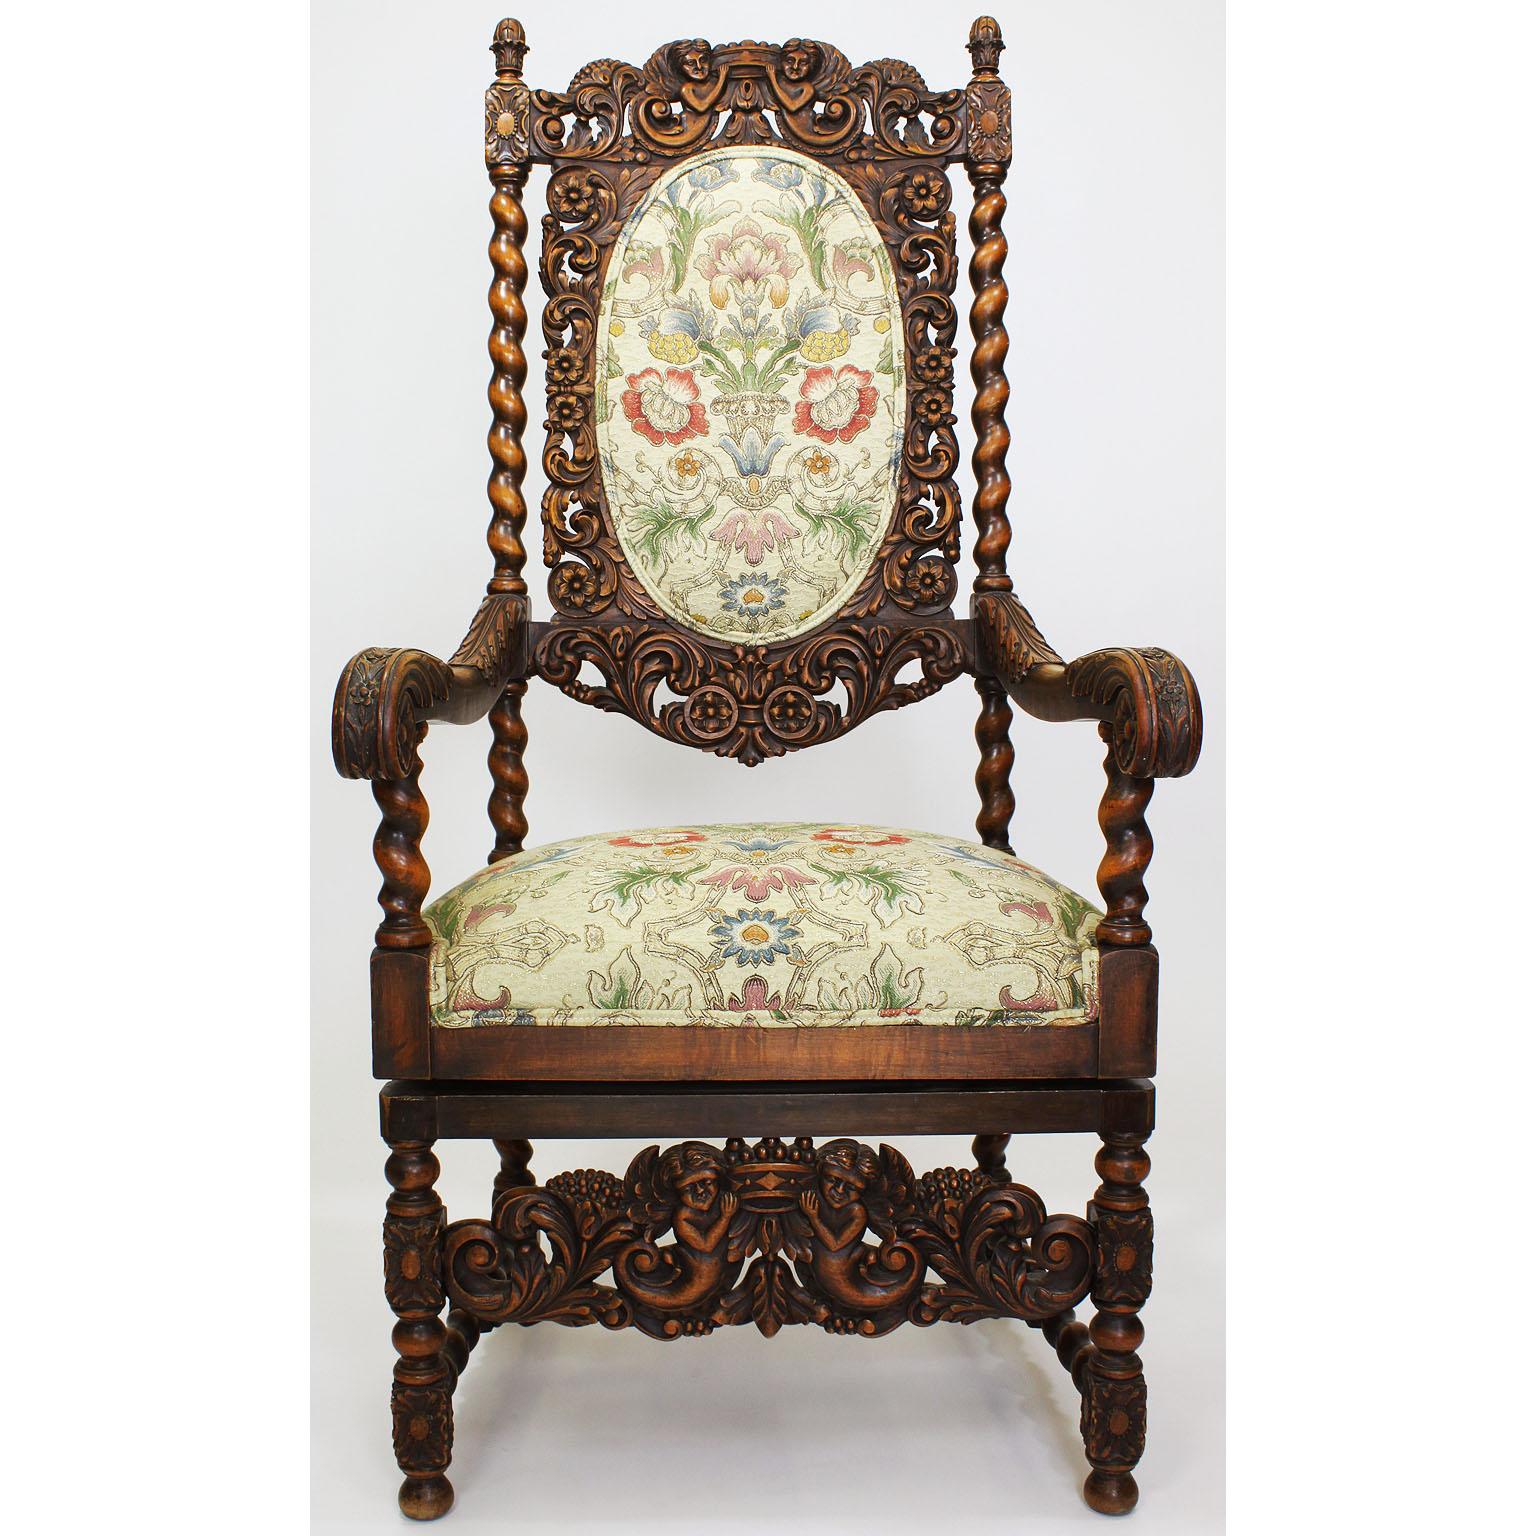 A fine pair of Italian 19th-20th century Baroque Revival style walnut figural carved high-back throne armchairs, each upholstered in a floral cream silk and gold fabric. Please note that these armchairs were recently modified to swivel 360º around,